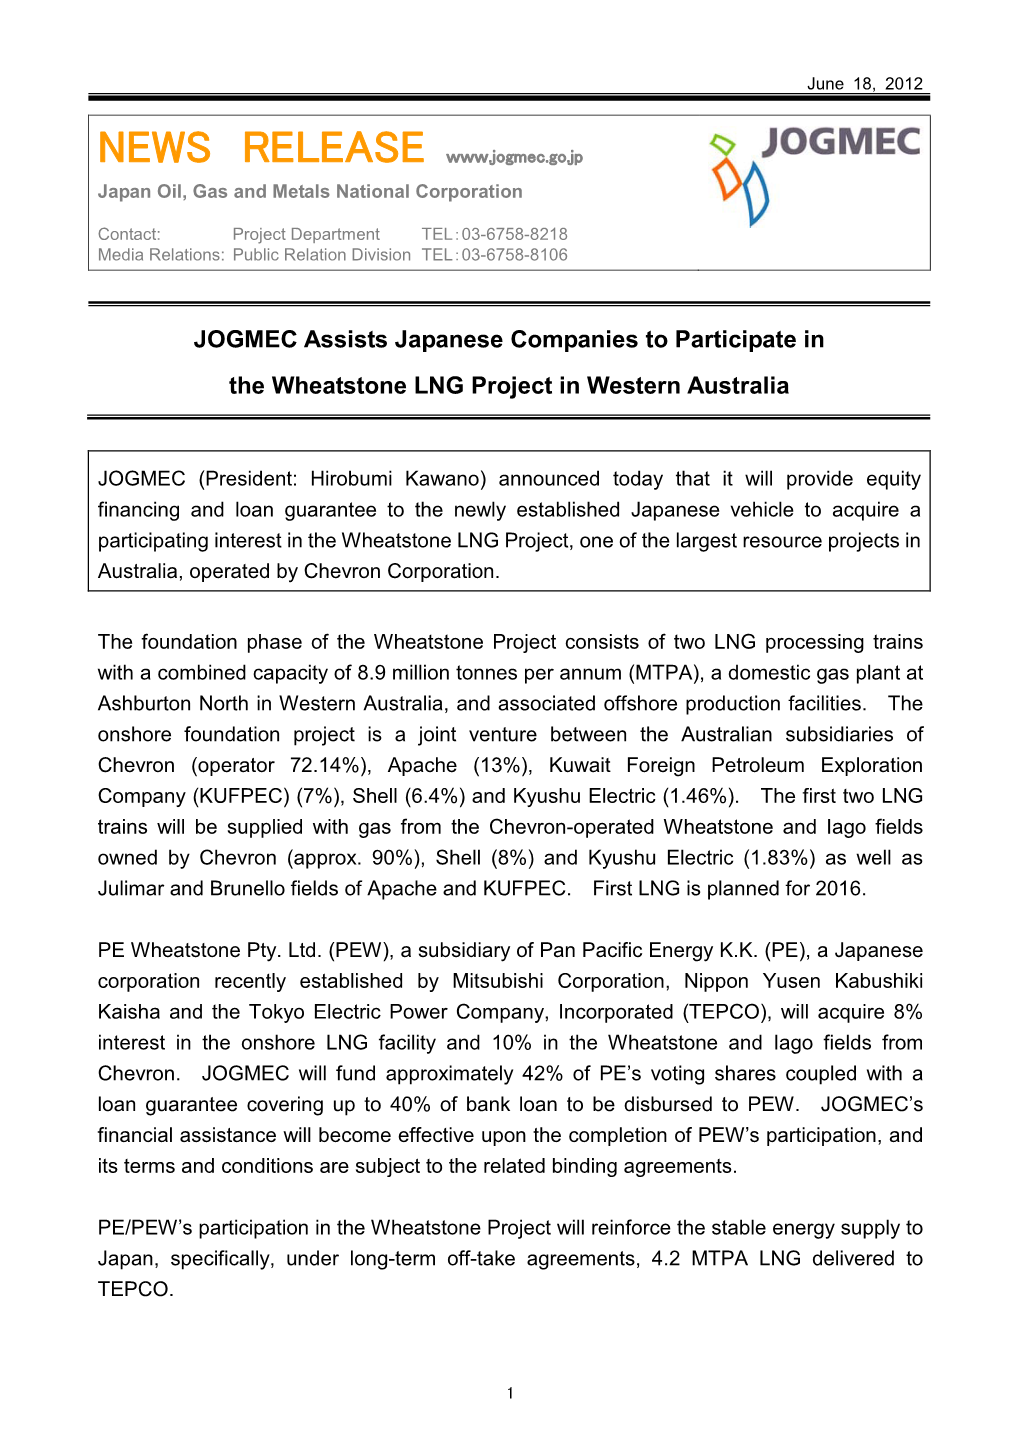 JOGMEC Assists Japanese Companies to Participate in the Wheatstone LNG Project in Western Australia